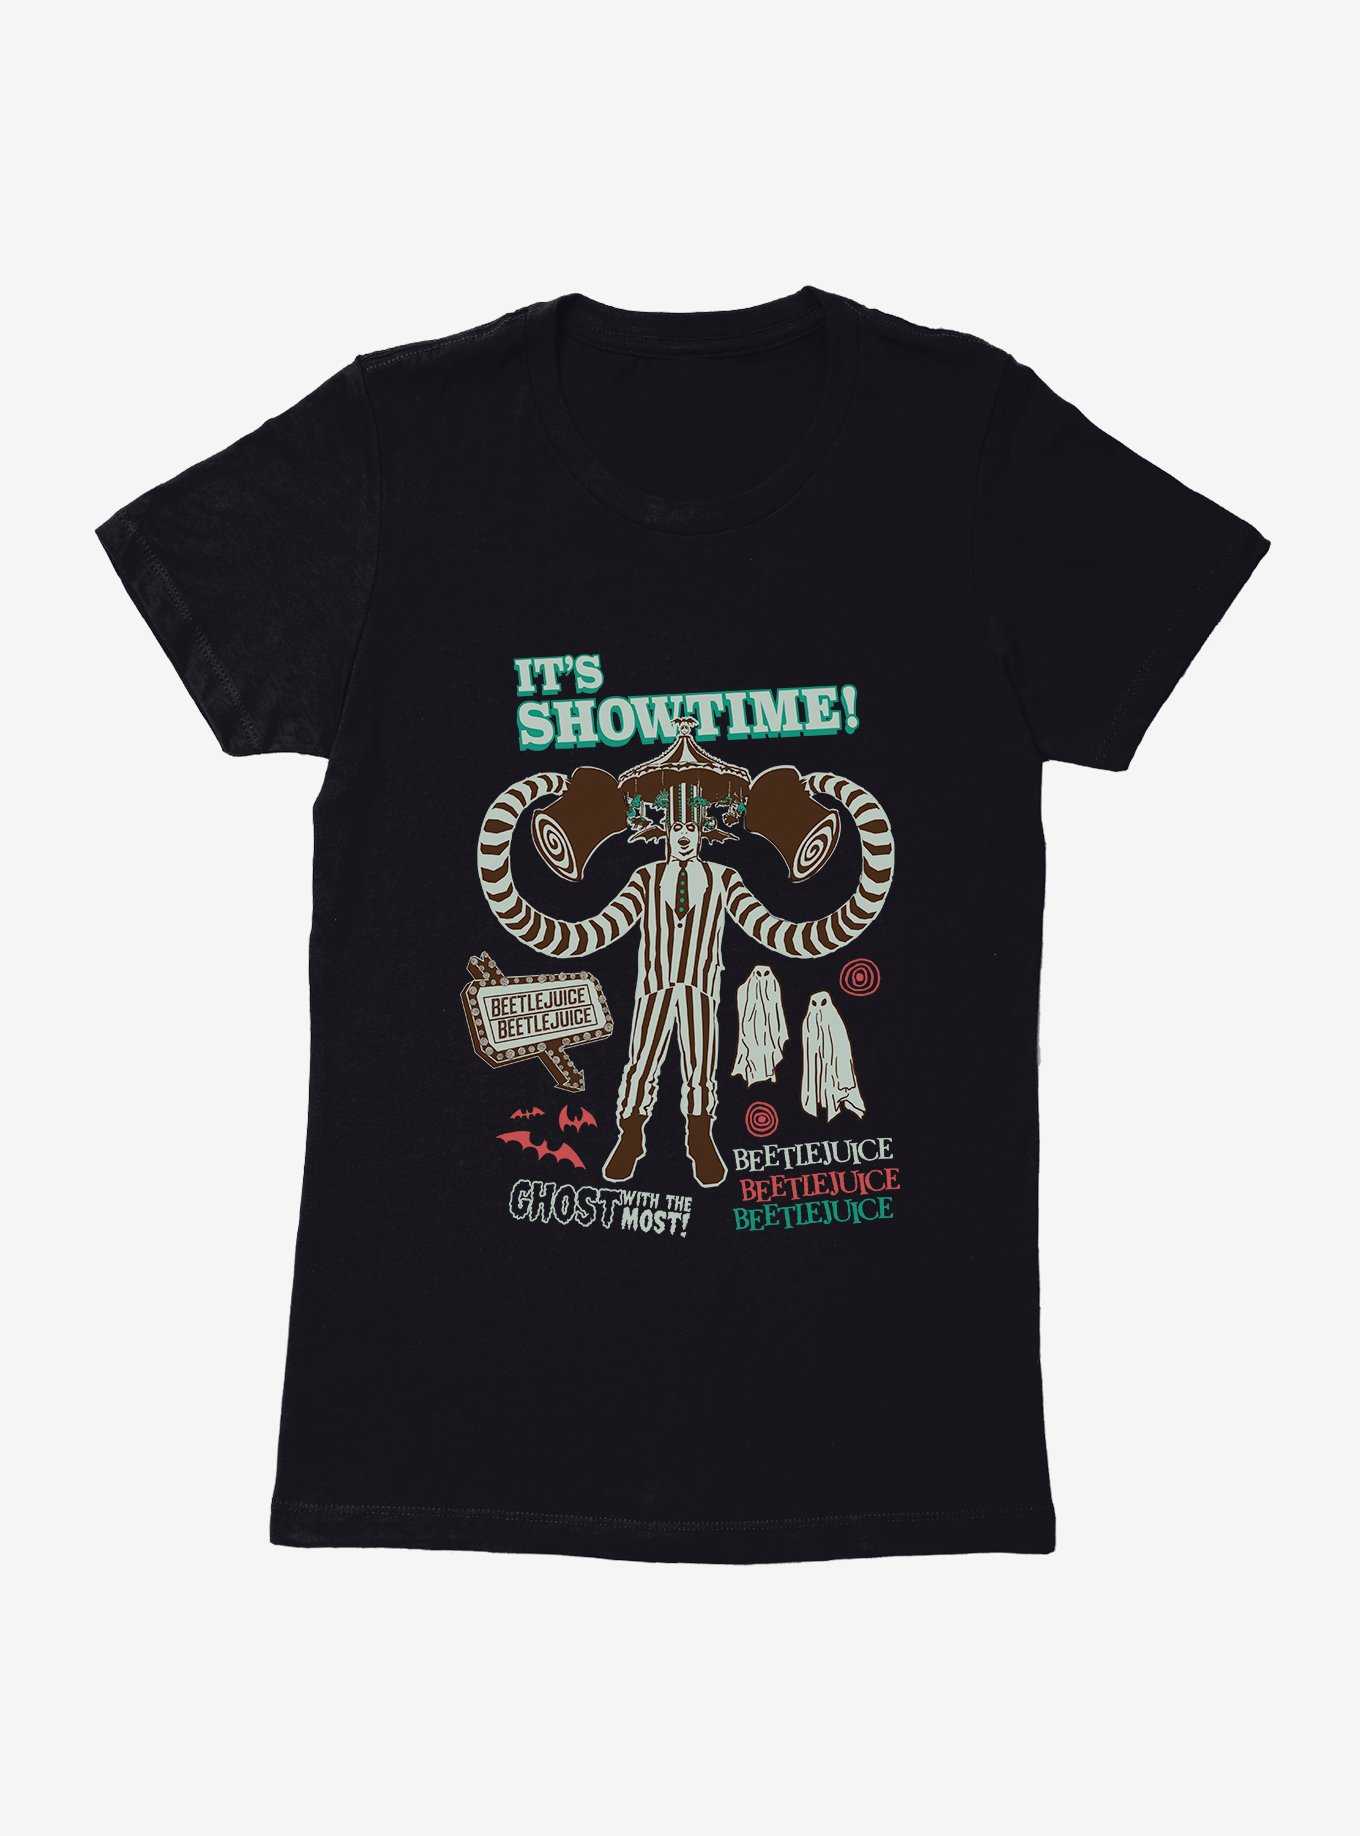 Beetlejuice Ghost With The Most! Womens T-Shirt, , hi-res